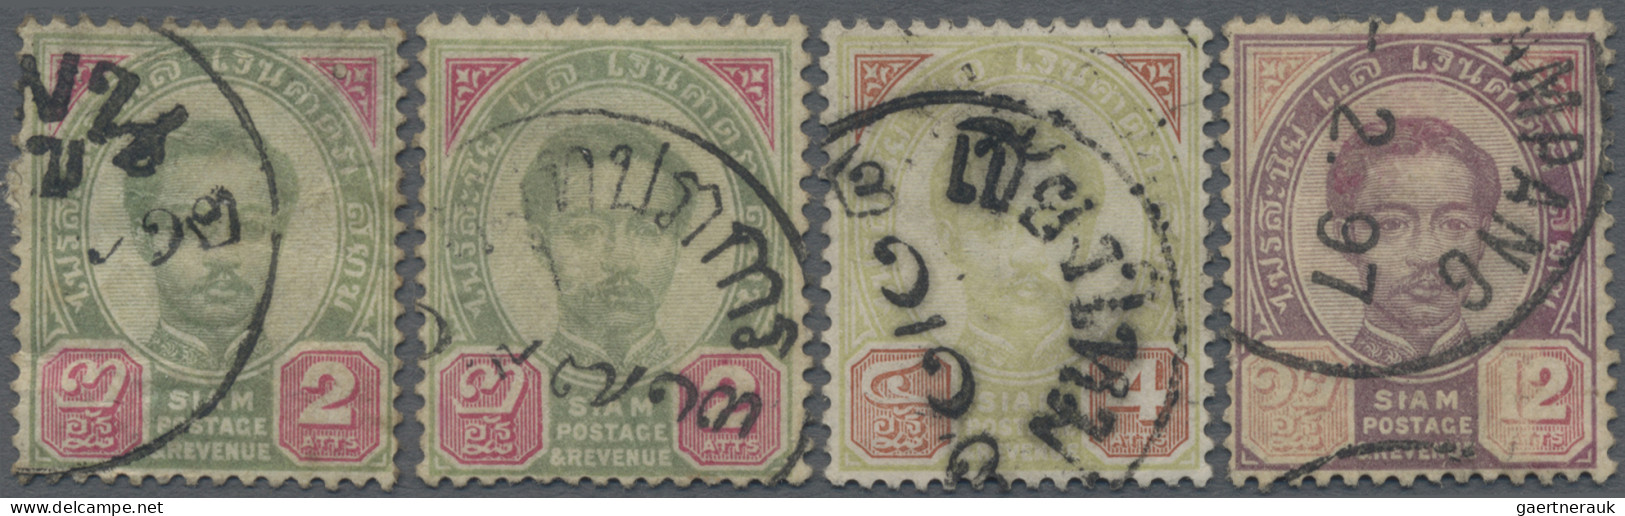 Thailand - Post Marks: 1887 Four Stamps With Scarce Postmarks, I.e. 2a. With LAM - Thailand